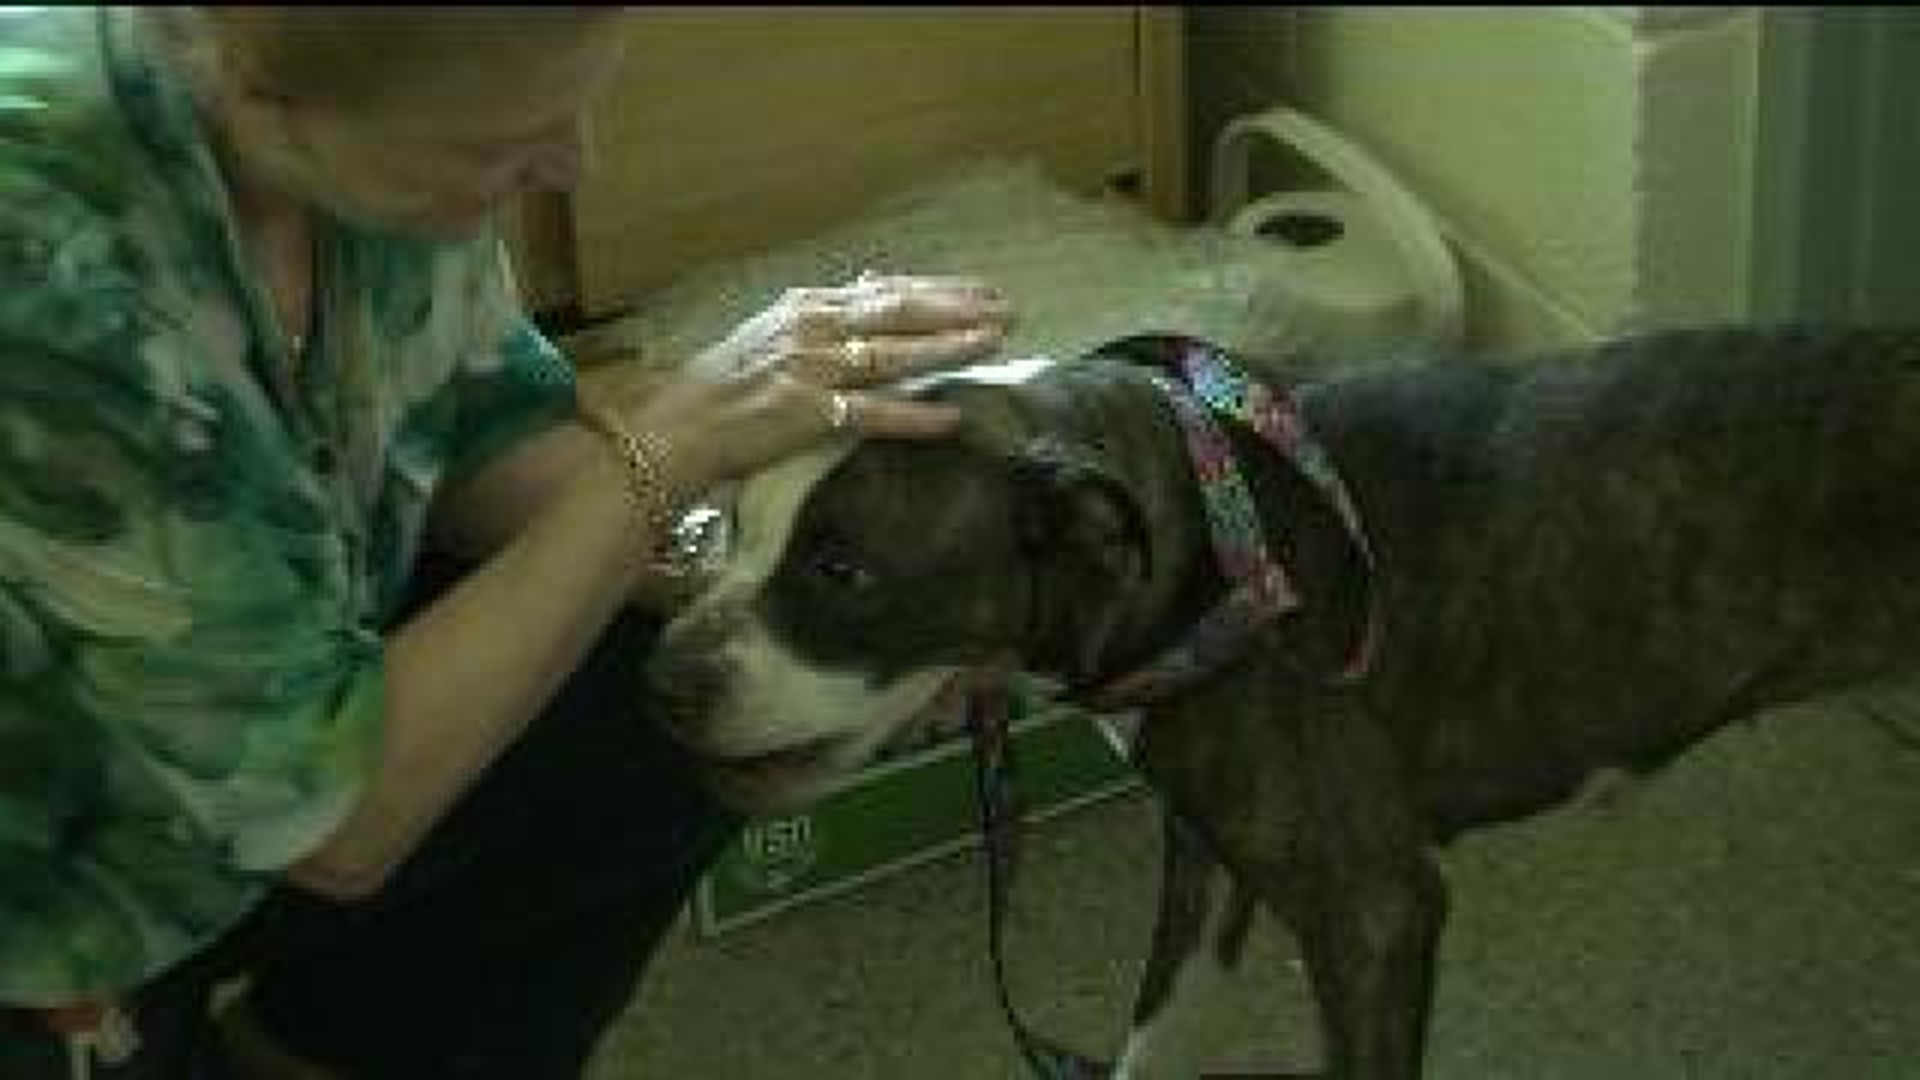 Dog Neglect Investigation In Wilkes-Barre